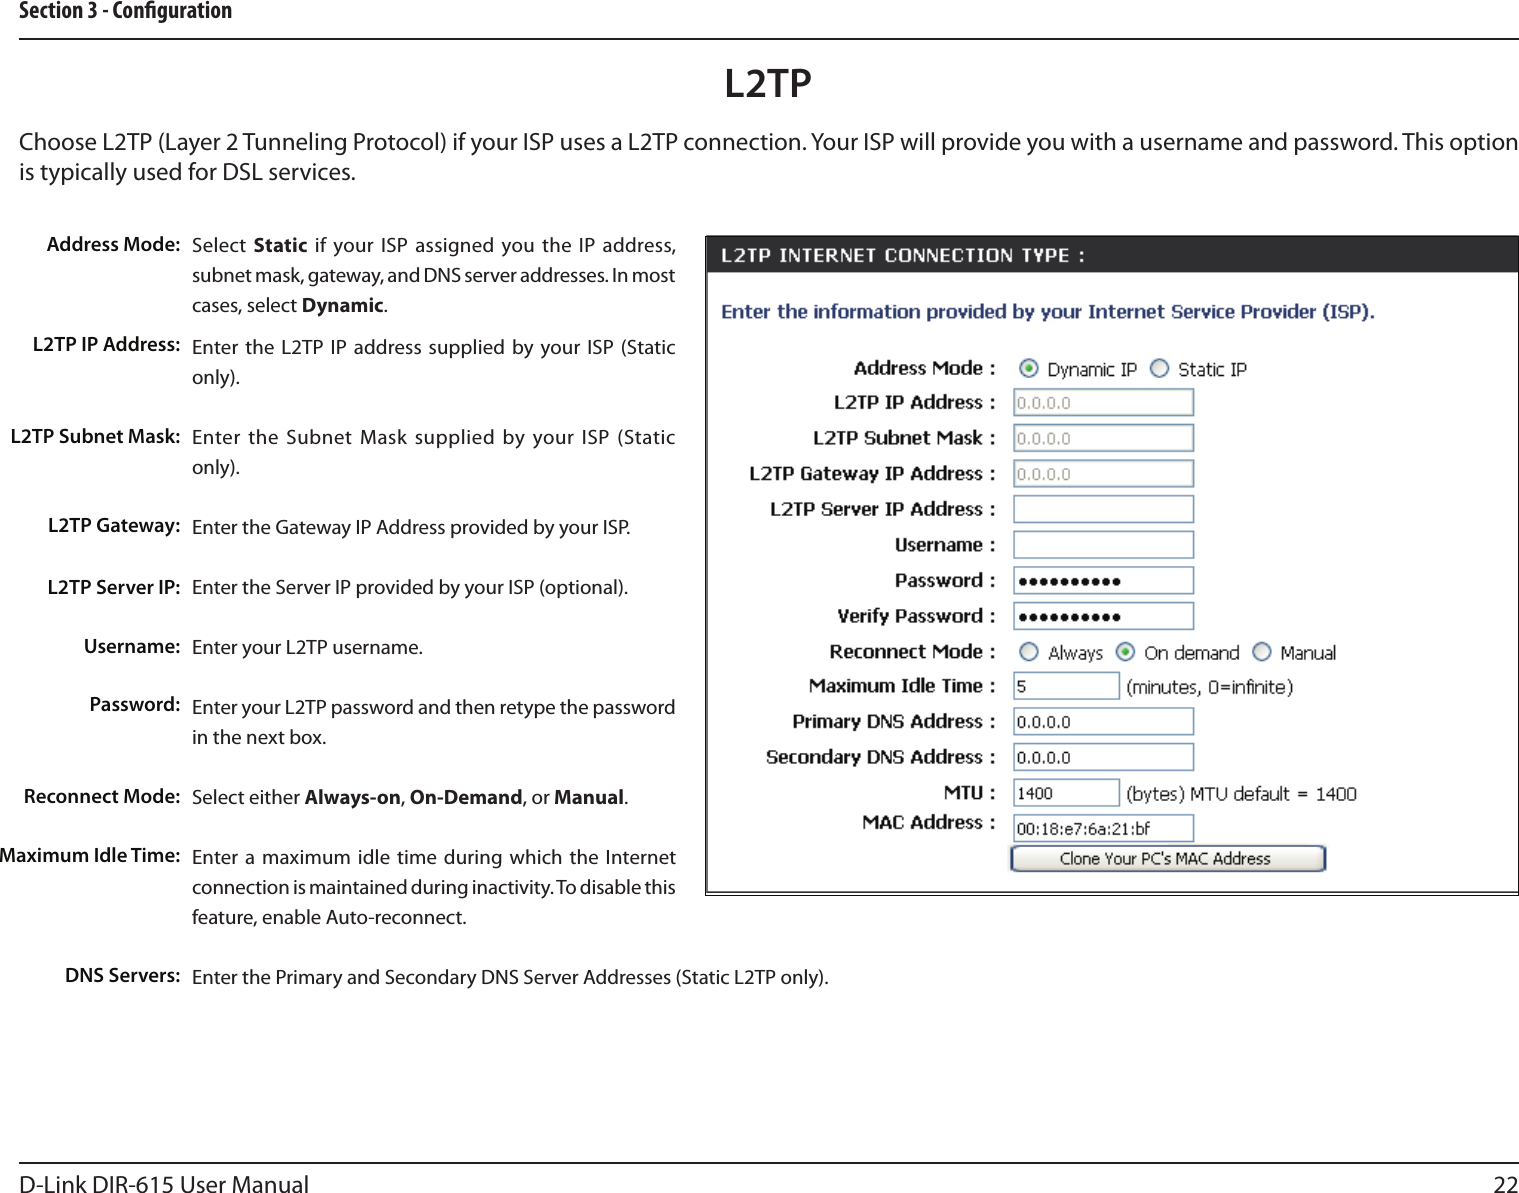 22D-Link DIR-615 User ManualSection 3 - CongurationSelect  Static if your ISP  assigned you the  IP  address, subnet mask, gateway, and DNS server addresses. In most cases, select Dynamic.Enter the  L2TP  IP  address supplied by your ISP (Static only).Enter the  Subnet  Mask  supplied  by your ISP (Static only).Enter the Gateway IP Address provided by your ISP.Enter the Server IP provided by your ISP (optional).Enter your L2TP username.Enter your L2TP password and then retype the password in the next box.Select either Always-on, On-Demand, or Manual.Enter a  maximum  idle  time during which the Internet connection is maintained during inactivity. To disable this feature, enable Auto-reconnect.Enter the Primary and Secondary DNS Server Addresses (Static L2TP only).Address Mode:L2TP IP Address:L2TP Subnet Mask:L2TP Gateway:L2TP Server IP:Username:Password:Reconnect Mode:Maximum Idle Time: DNS Servers:L2TPChoose L2TP (Layer 2 Tunneling Protocol) if your ISP uses a L2TP connection. Your ISP will provide you with a username and password. This option is typically used for DSL services. 